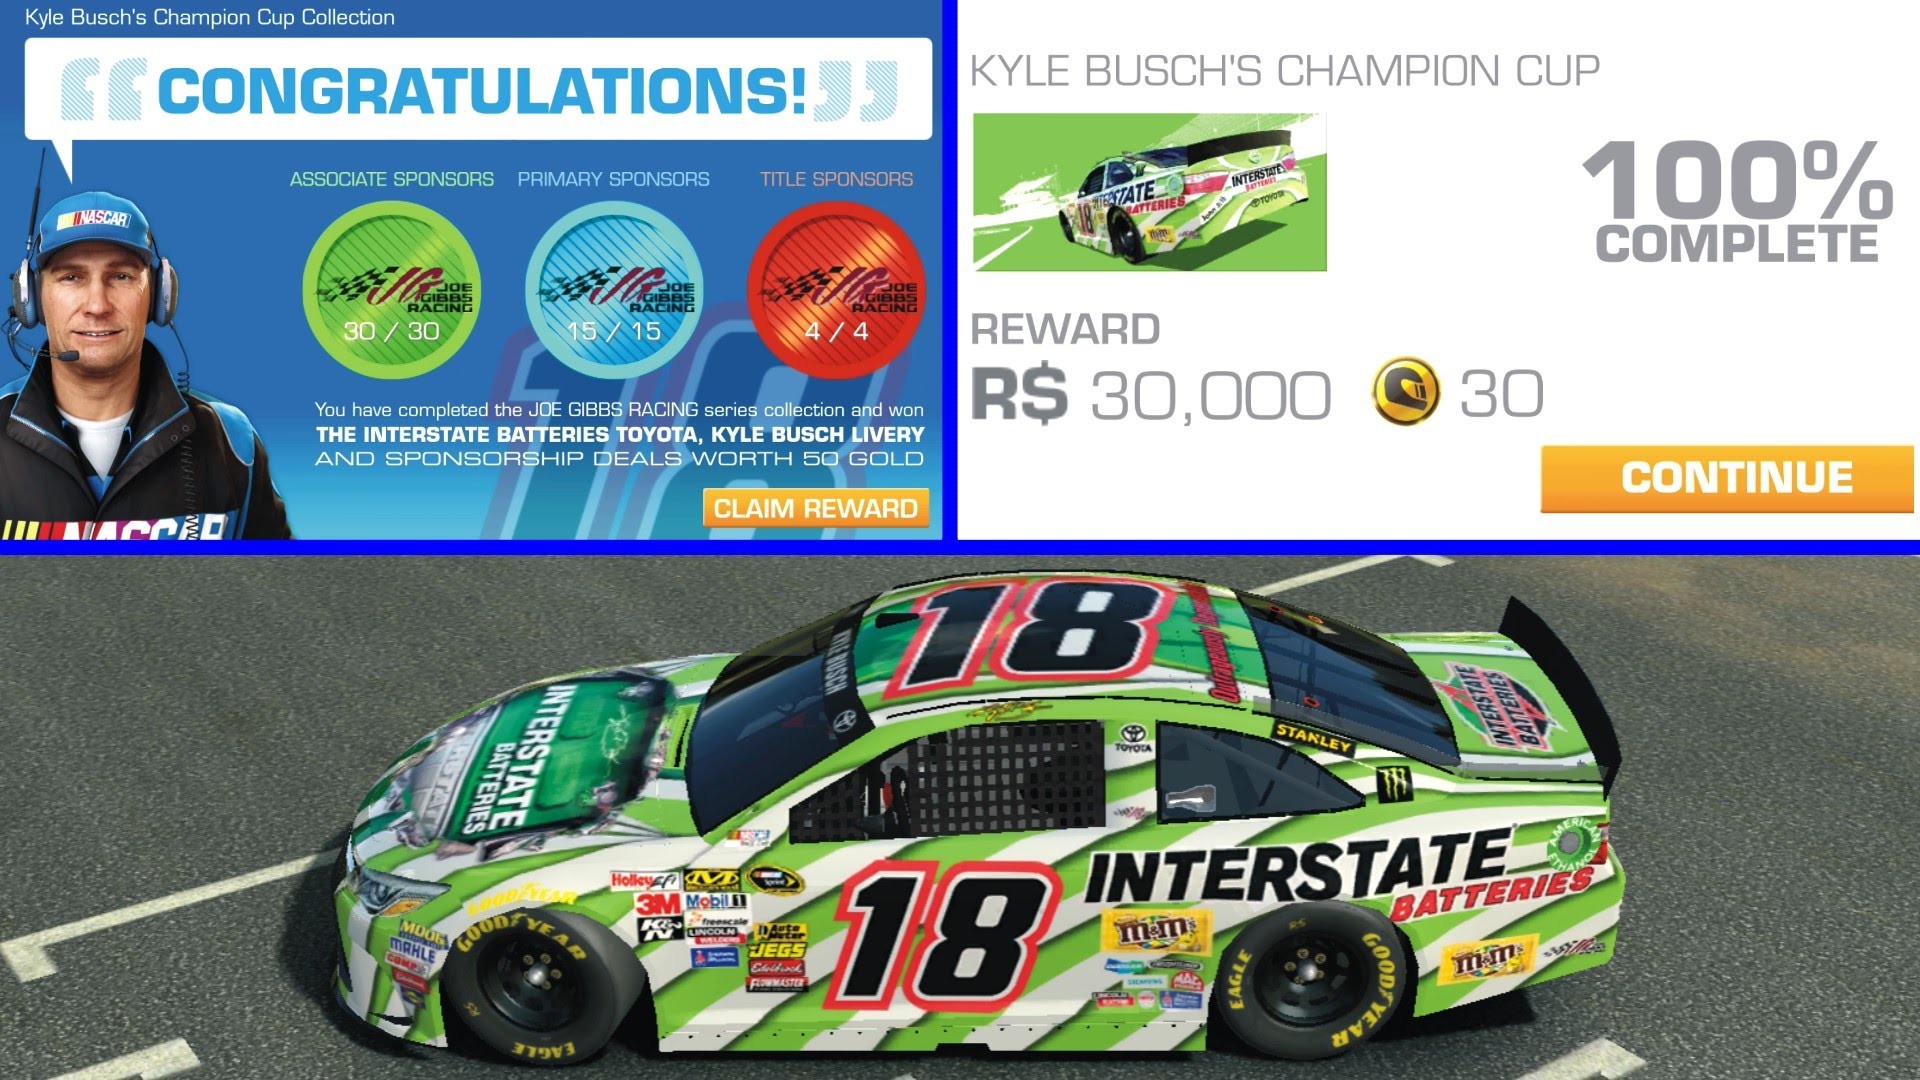 1920x1080 Real Racing 3 NASCAR - 100% of Kyle Busch's Champion Cup Complete - YouTube